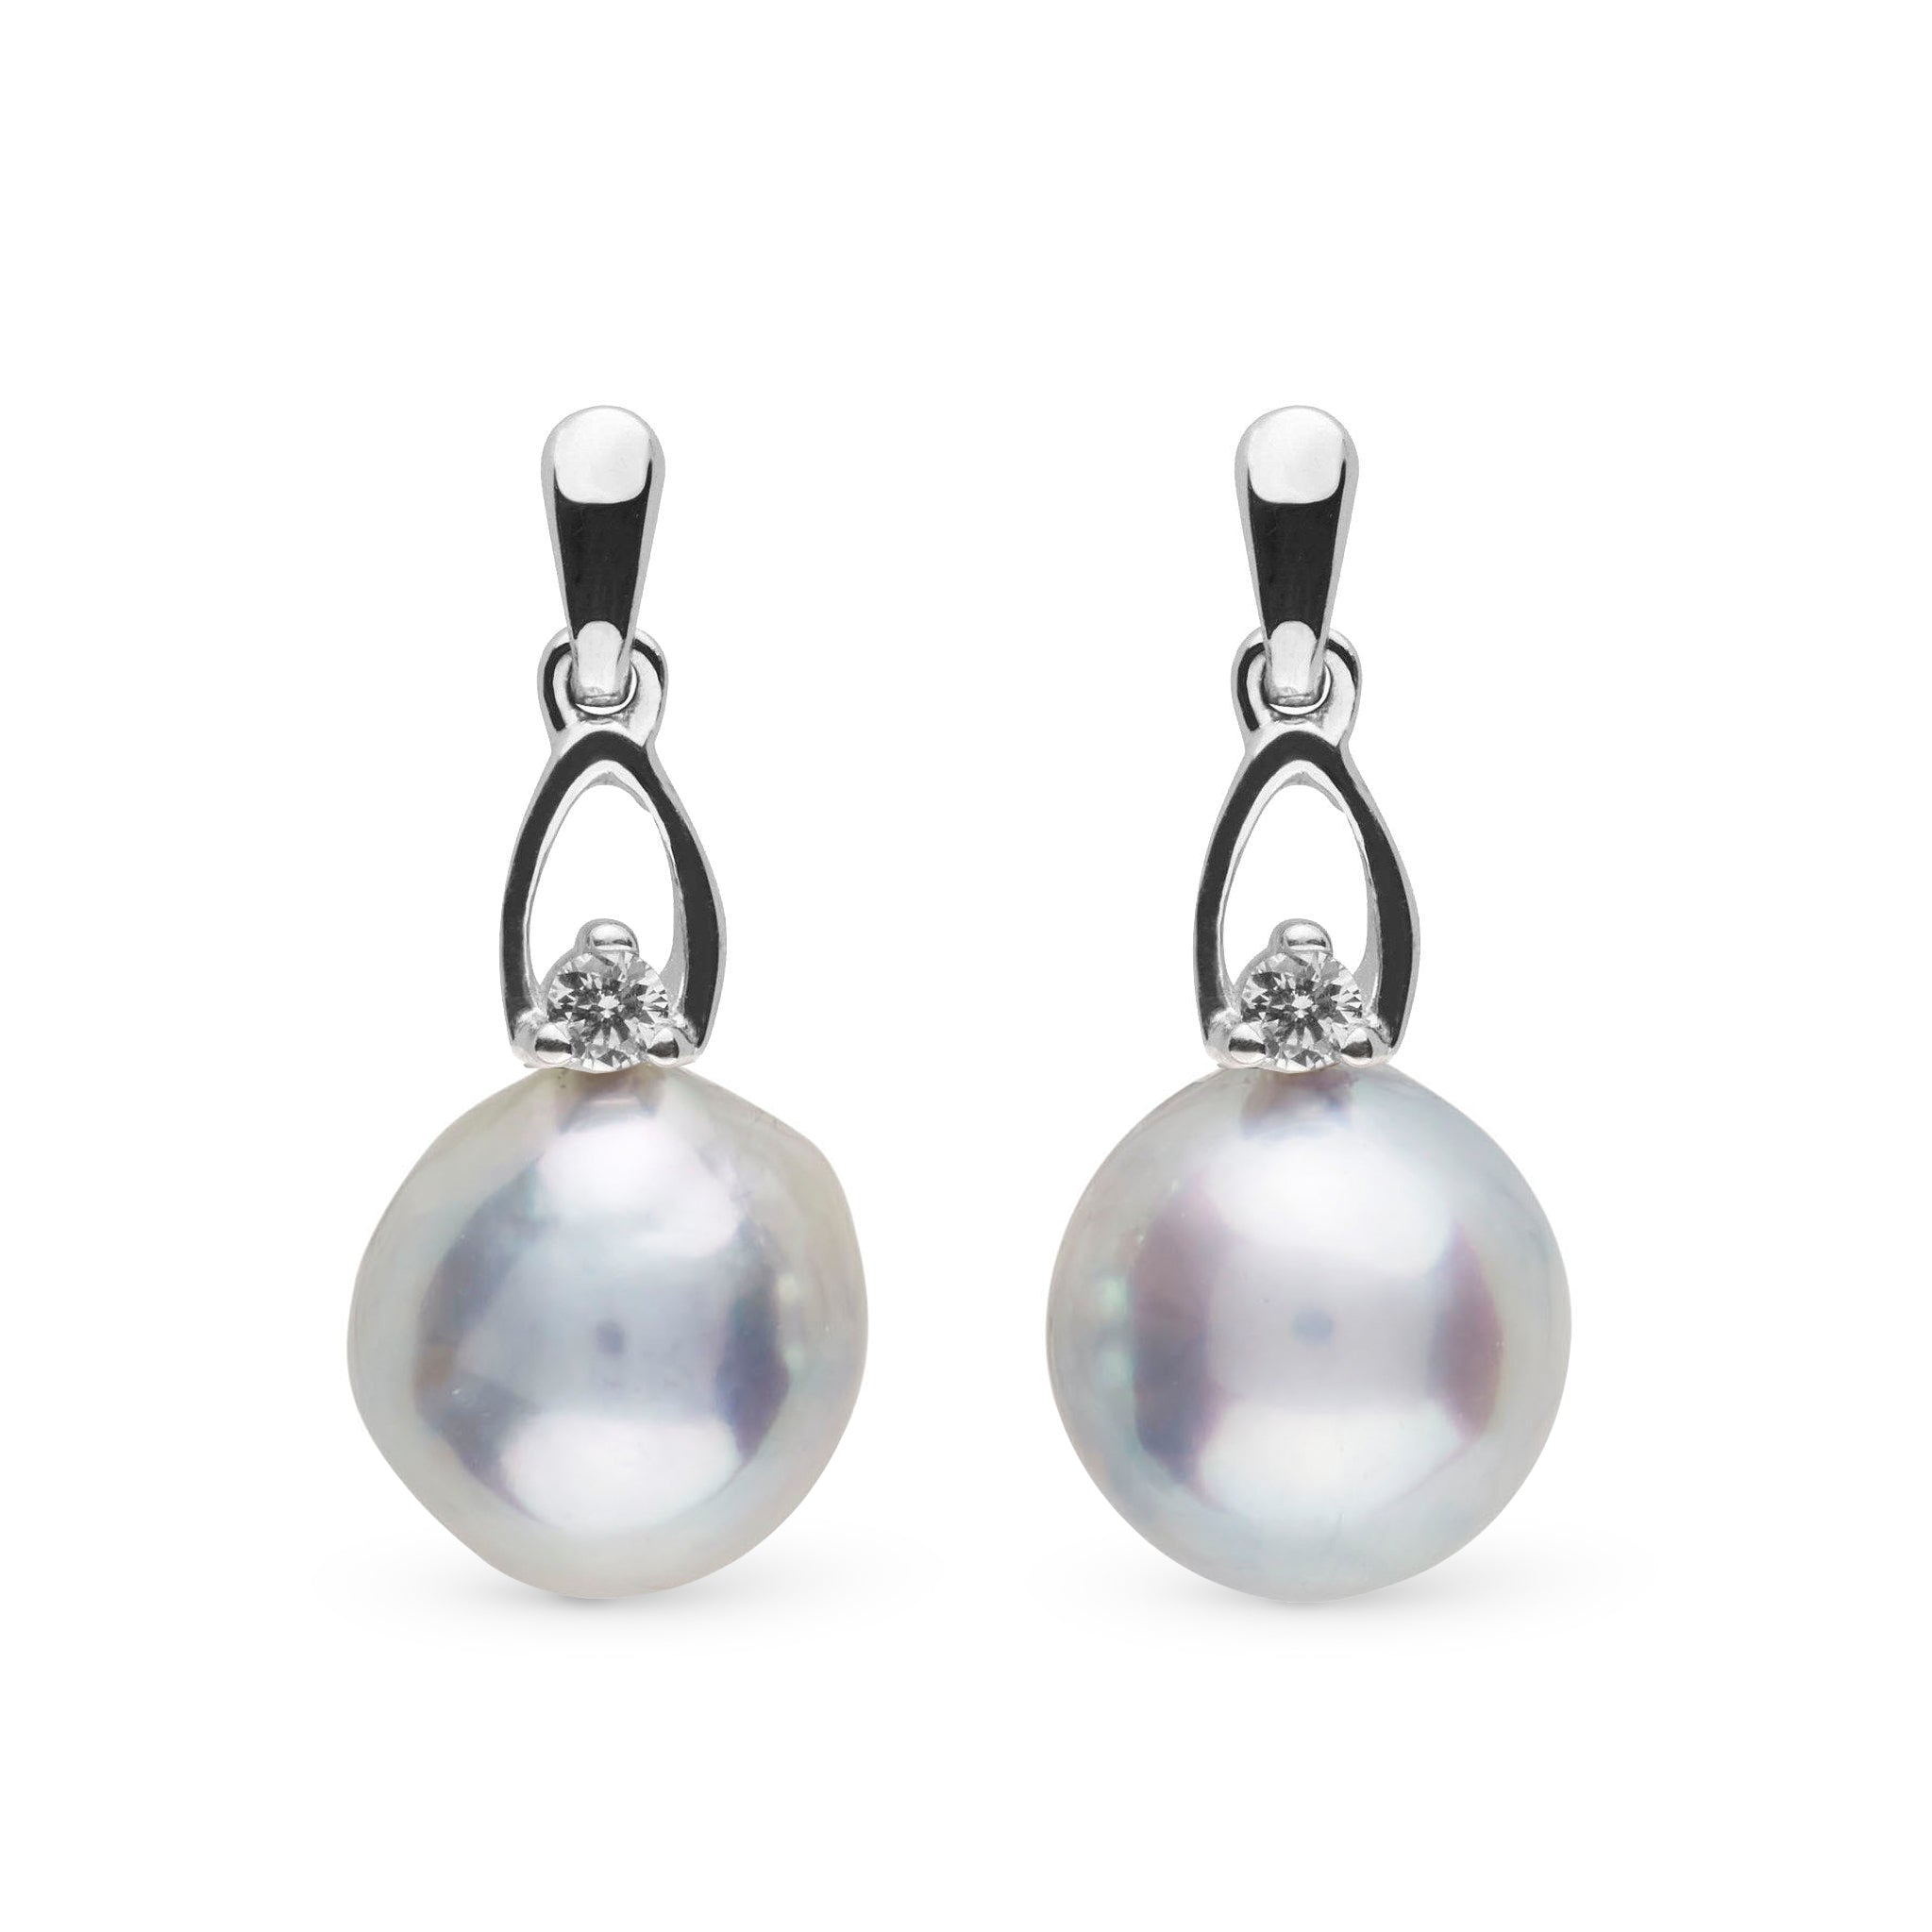 Juliet Collection 8.0-9.0 mm Baroque Silver Akoya Pearl and VS1-G Quality Diamond Earrings